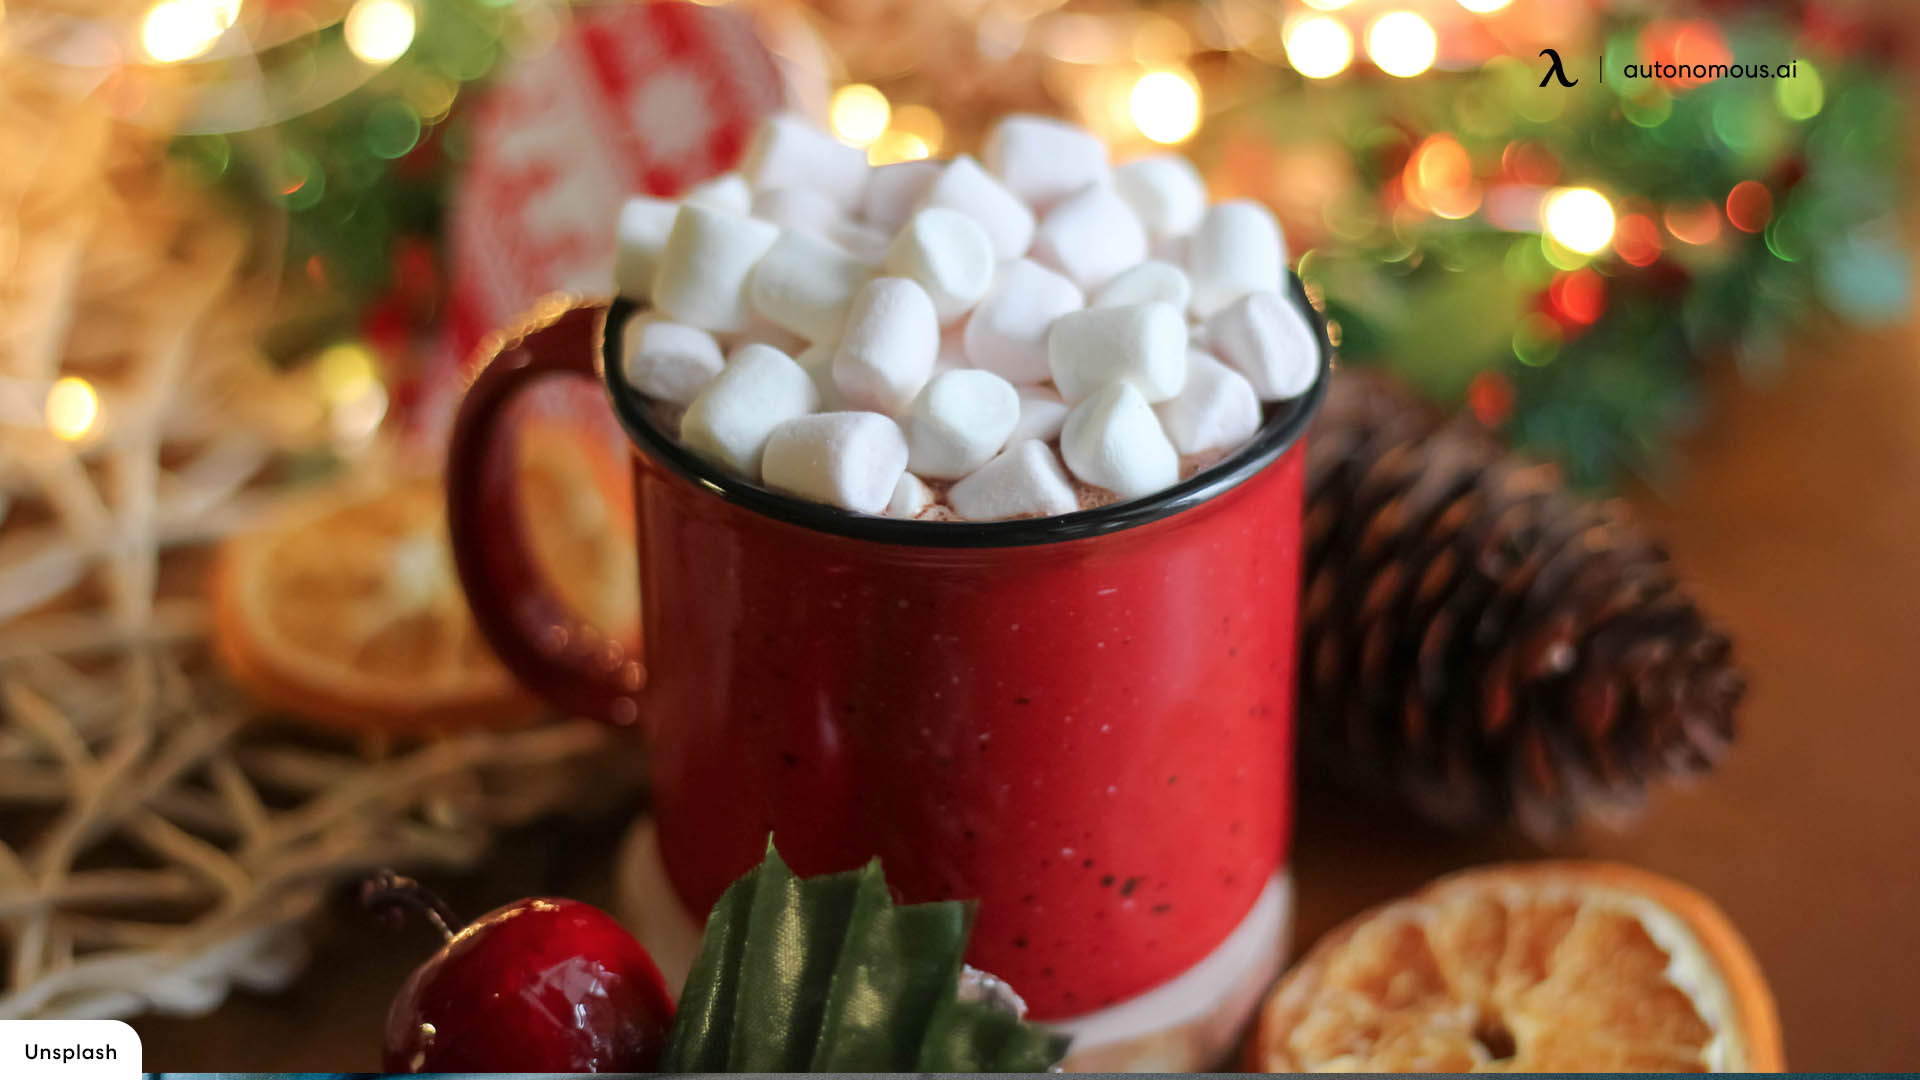 Your favorite drinks aesthetic Christmas wallpapers